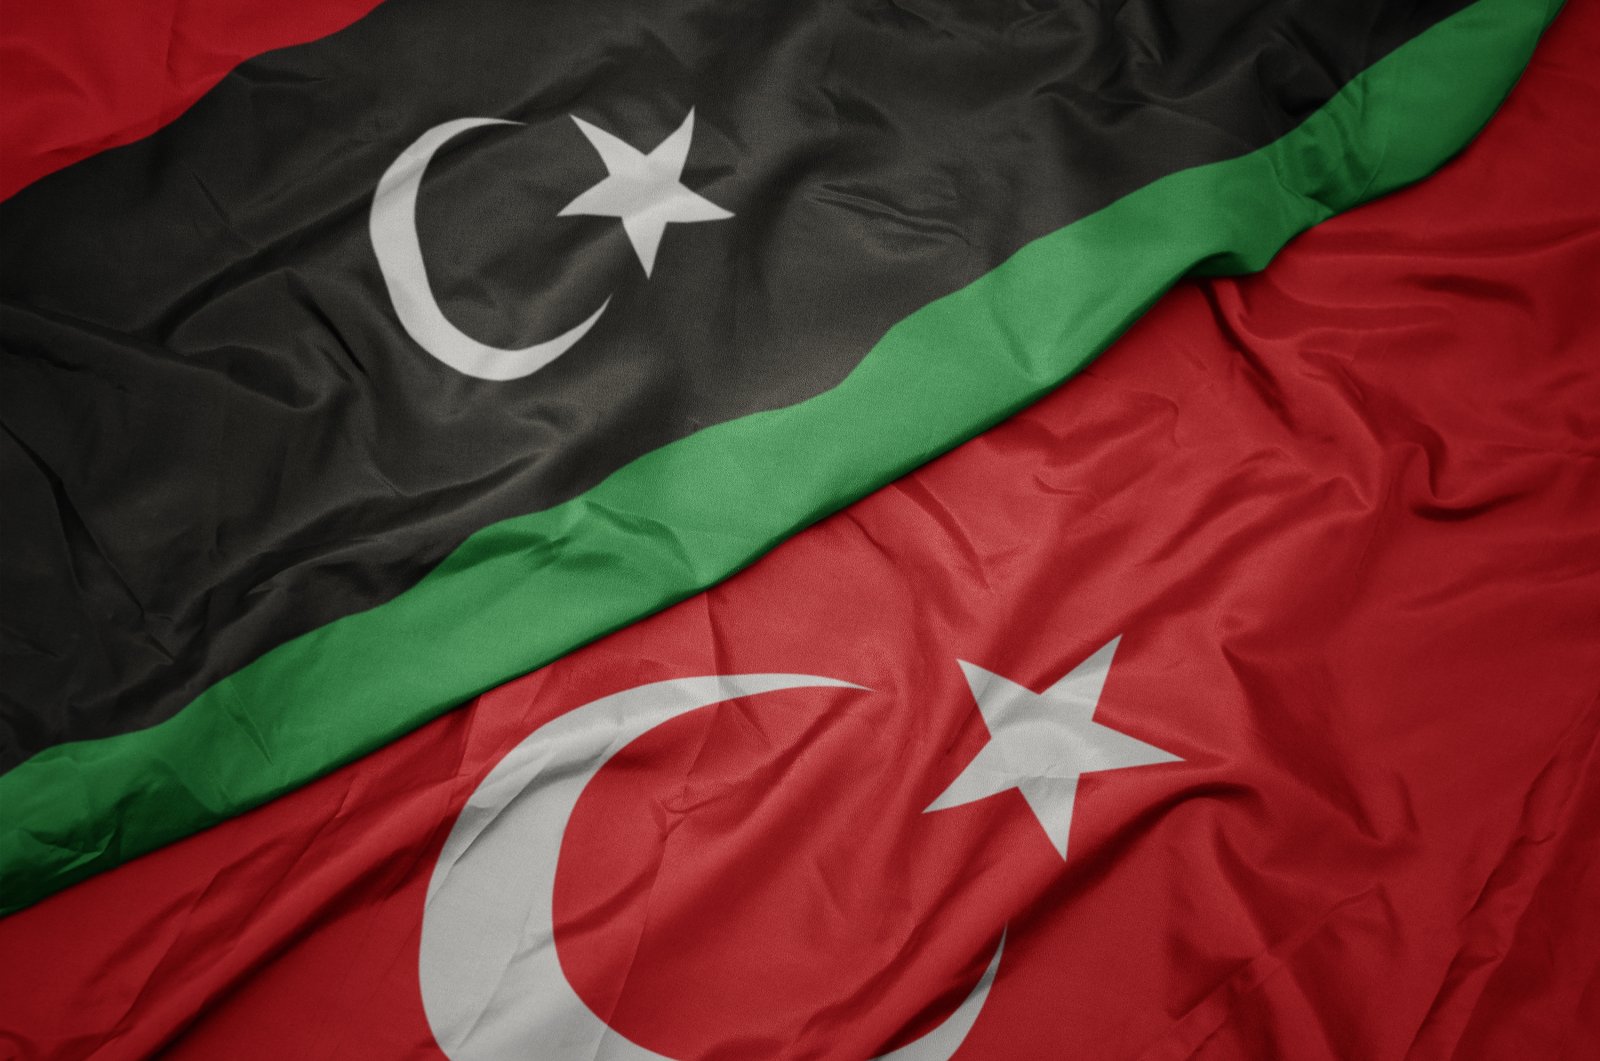 Flags of Turkey and Libya. (Shutterstock File Photo)